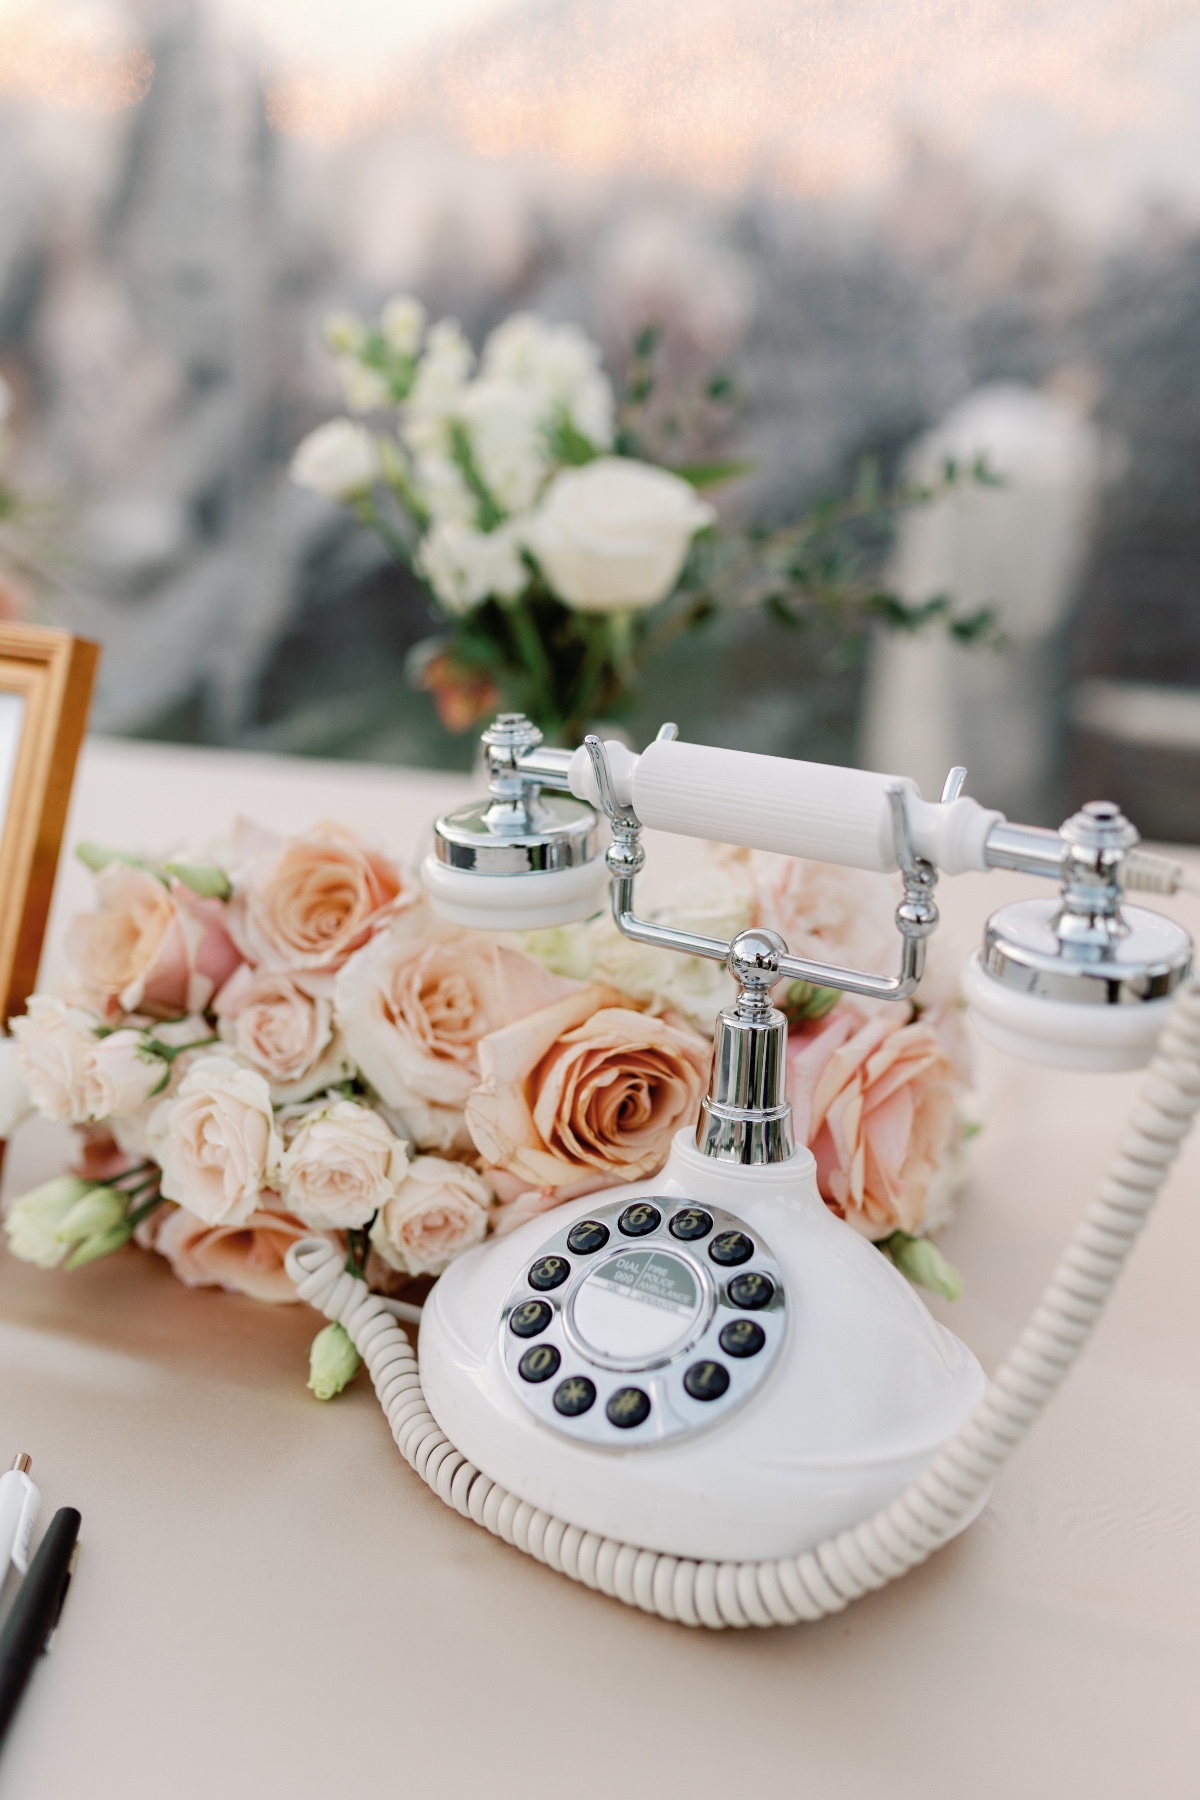 Pink guest book table with vintage phone